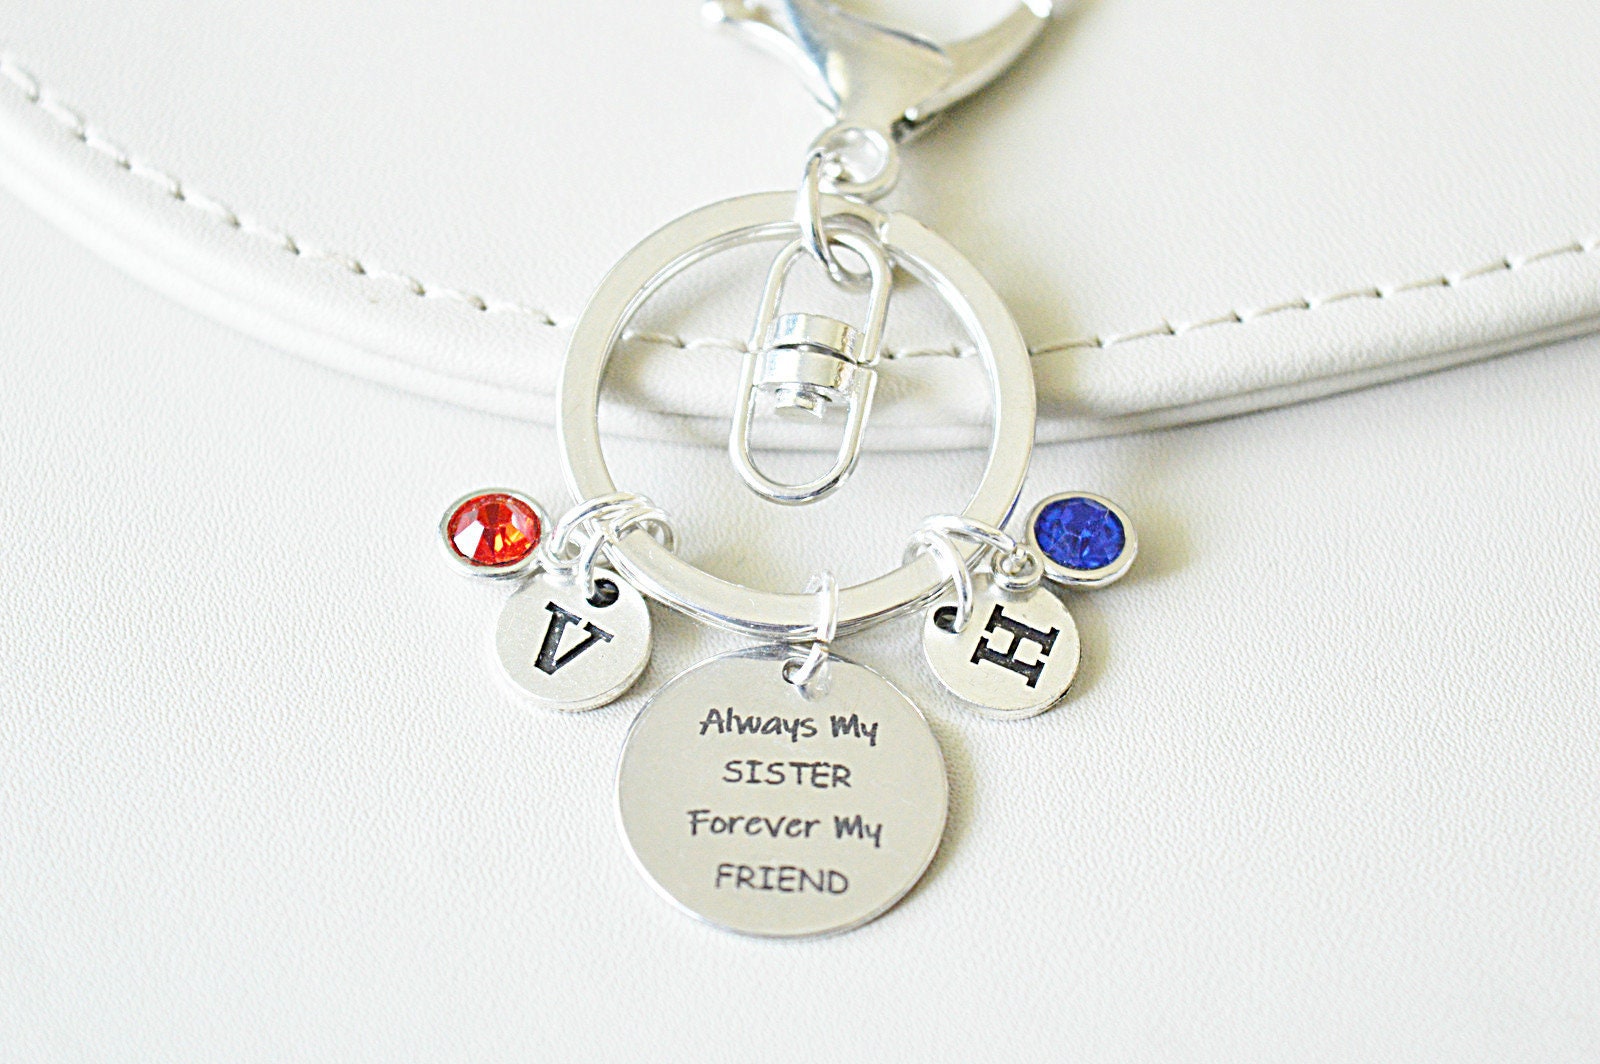 Sister Quote, Sister Message Gift, Sister Keyring Gift, Sister Birthday Gift, Personalised Sister Gift, Gift from sister, Unique Sister Gift